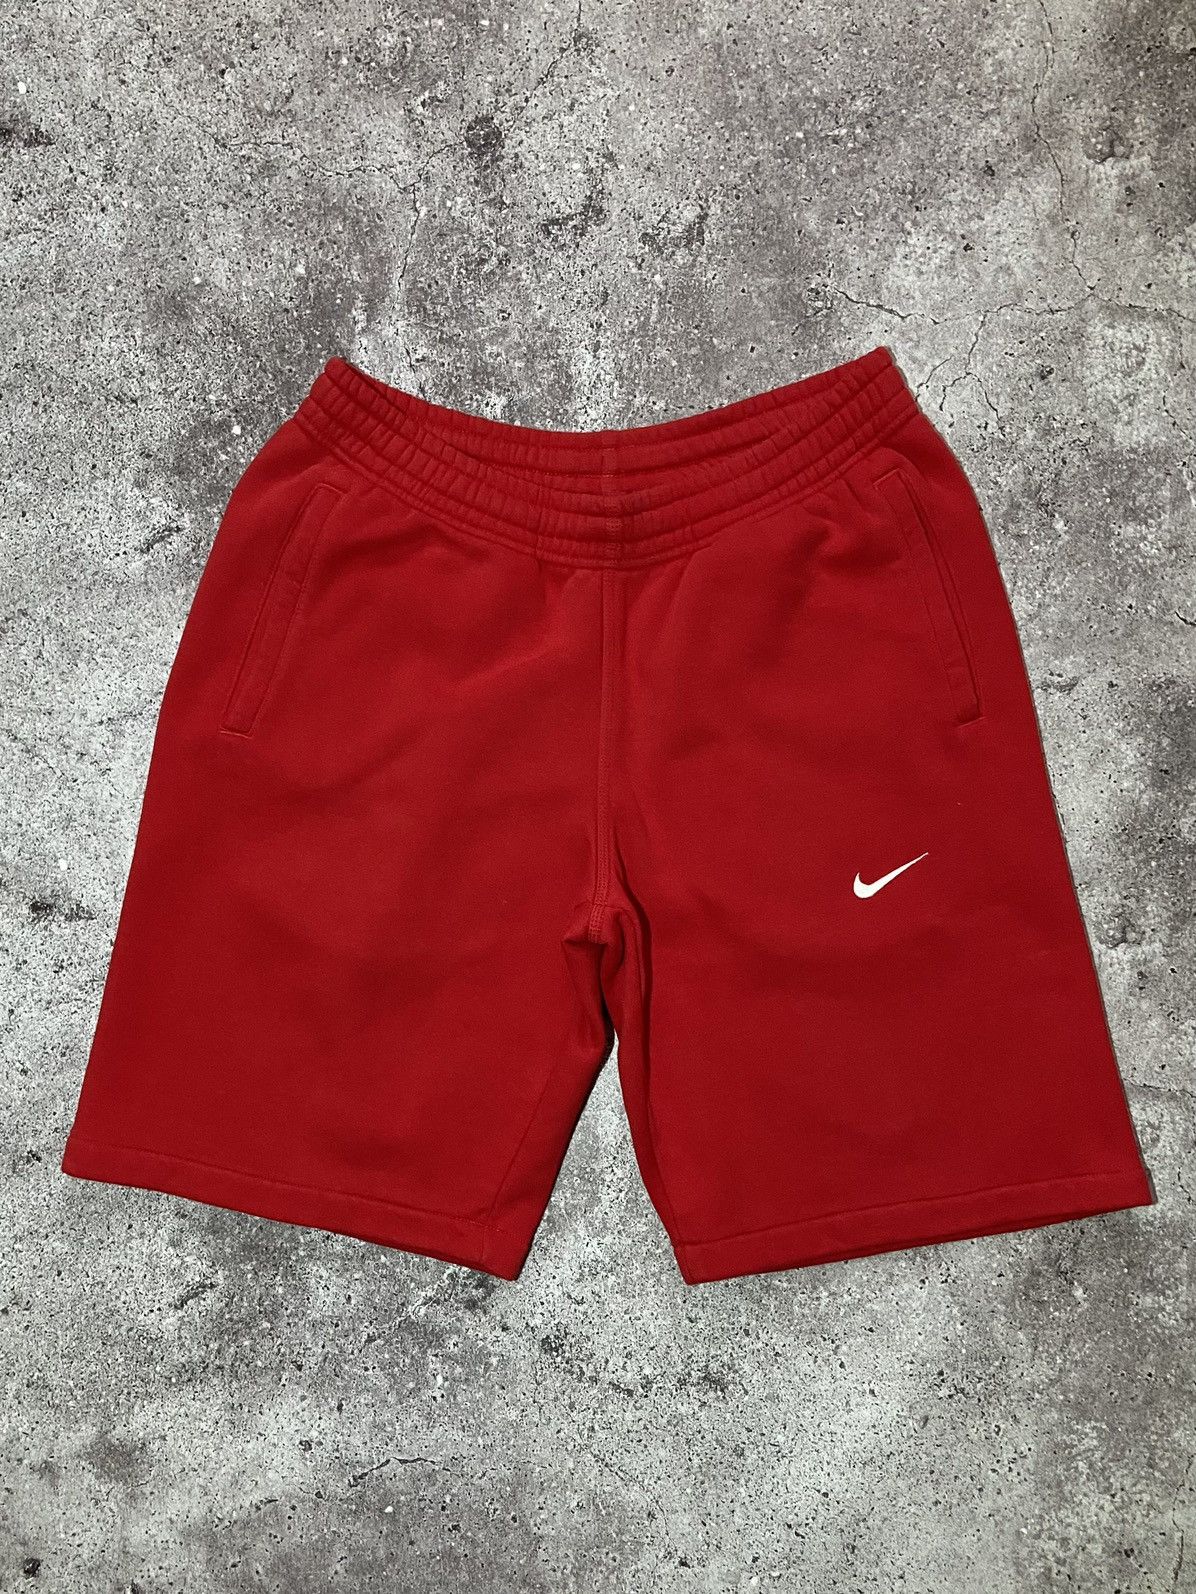 Pre-owned Nike X Vintage Nike Vintage Streetwear Drill Y2k Cotton Red Shorts